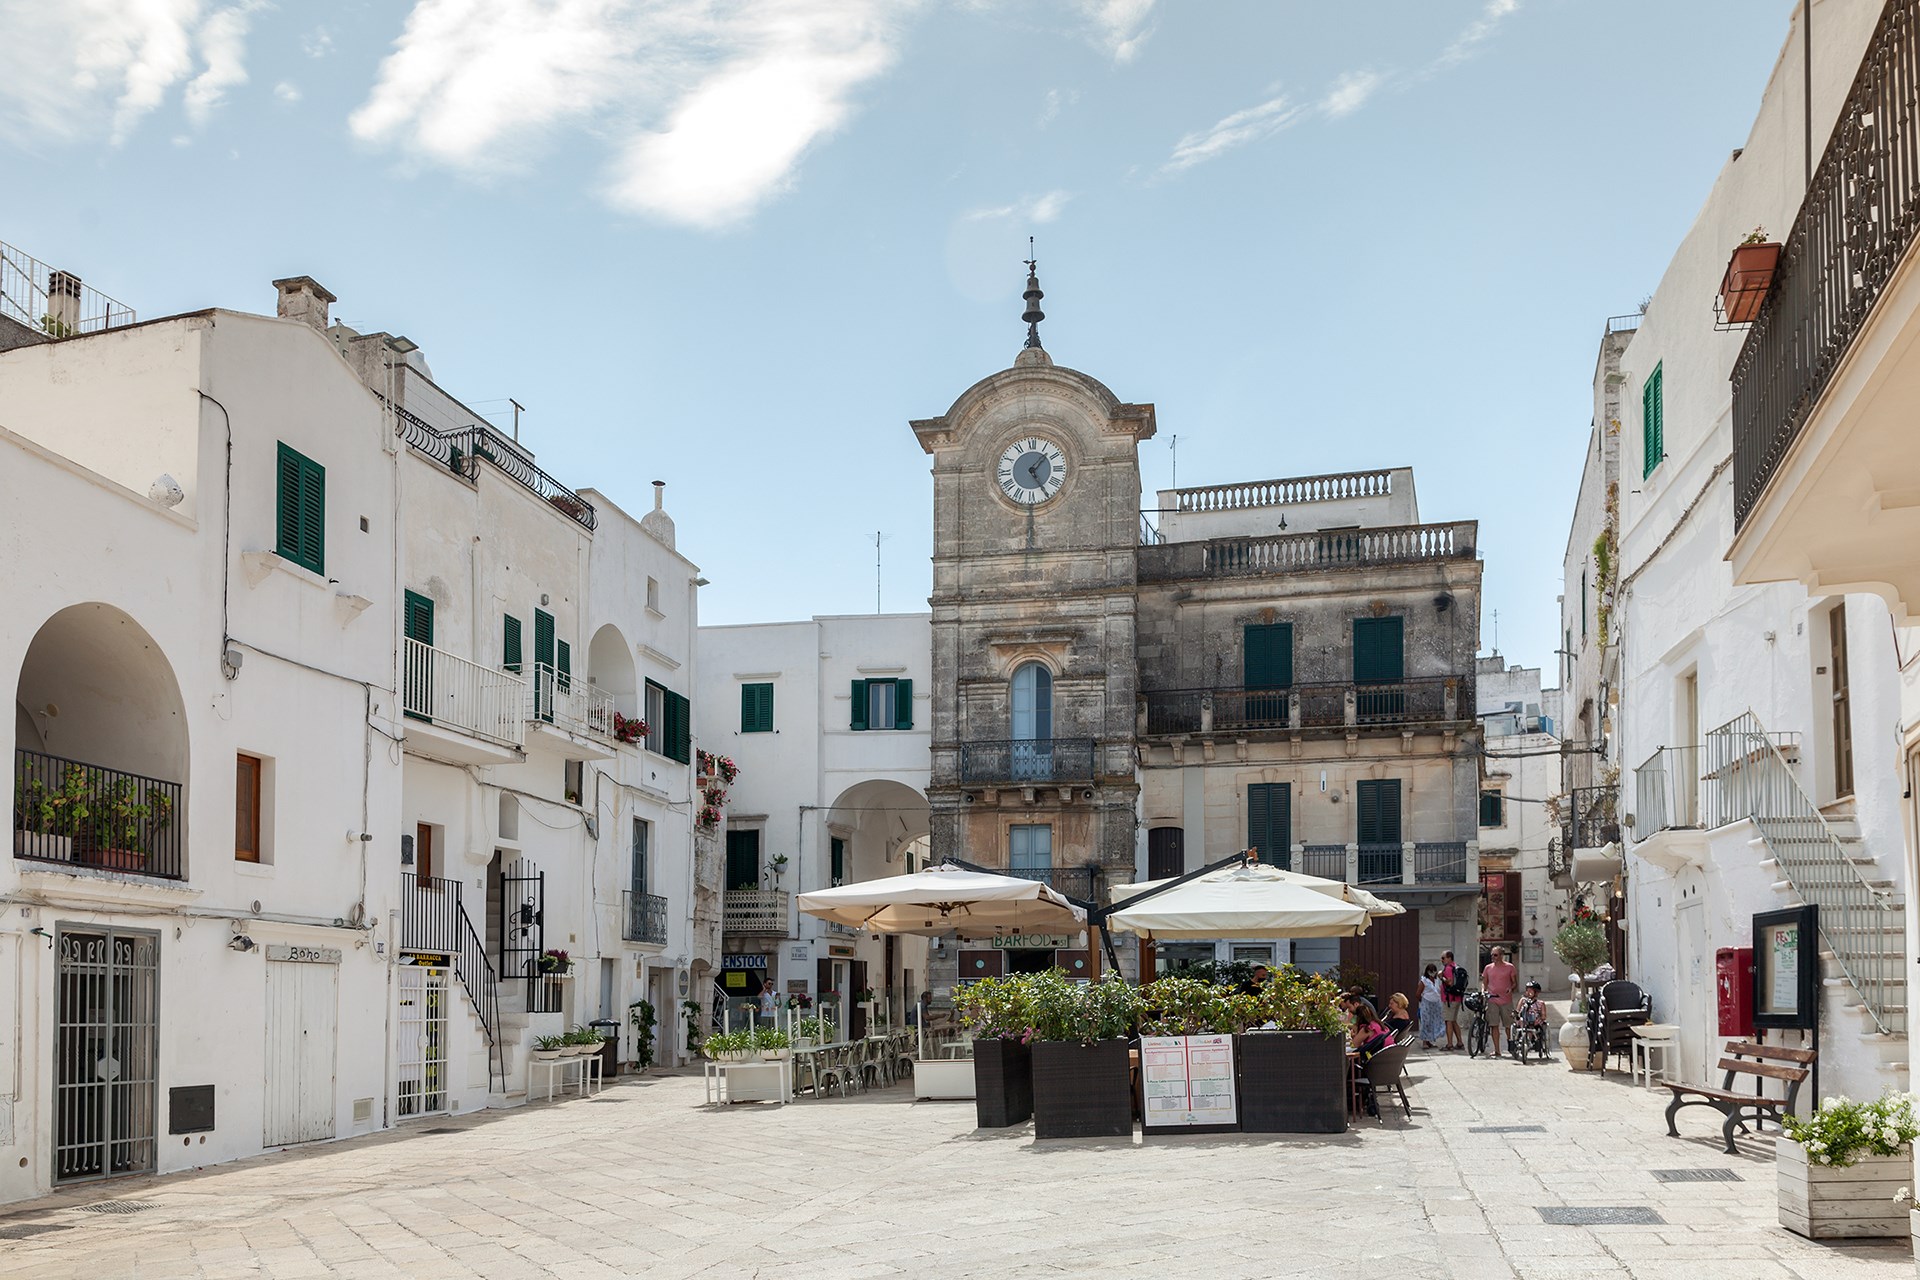 The Charms of Cisternino